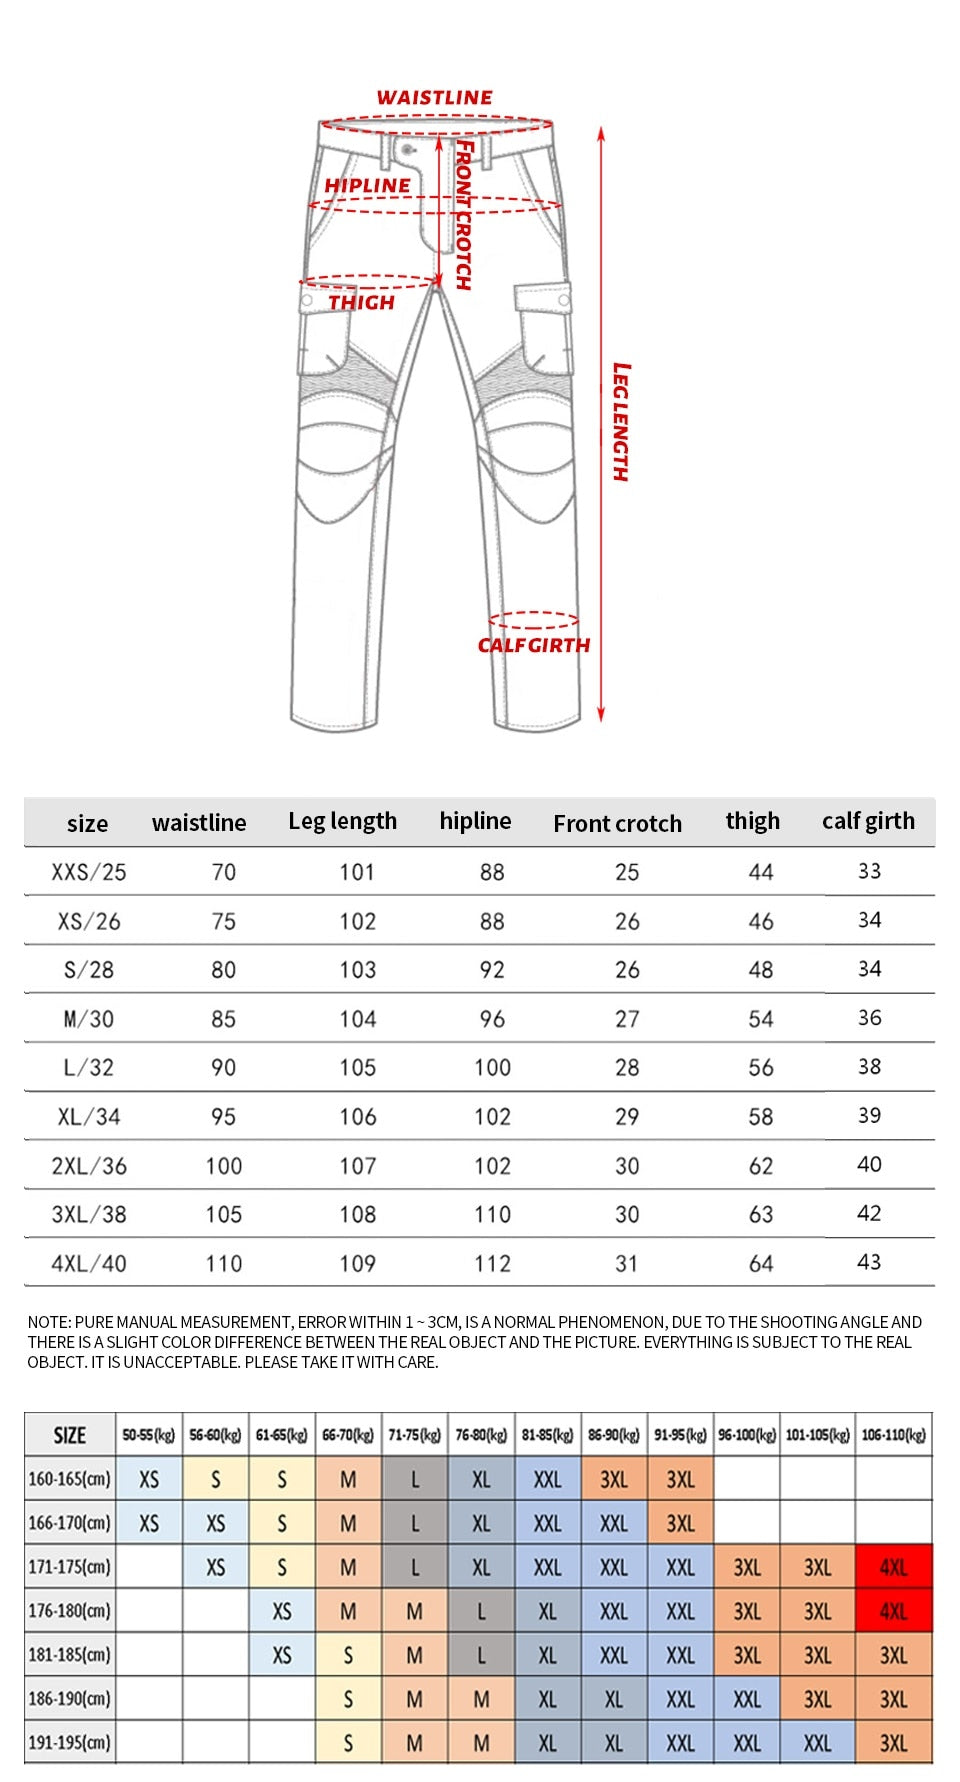 New spring summer autumn motorcycle pants classic outdoor riding motorcycle jeans Drop-resistant pants with protective gear